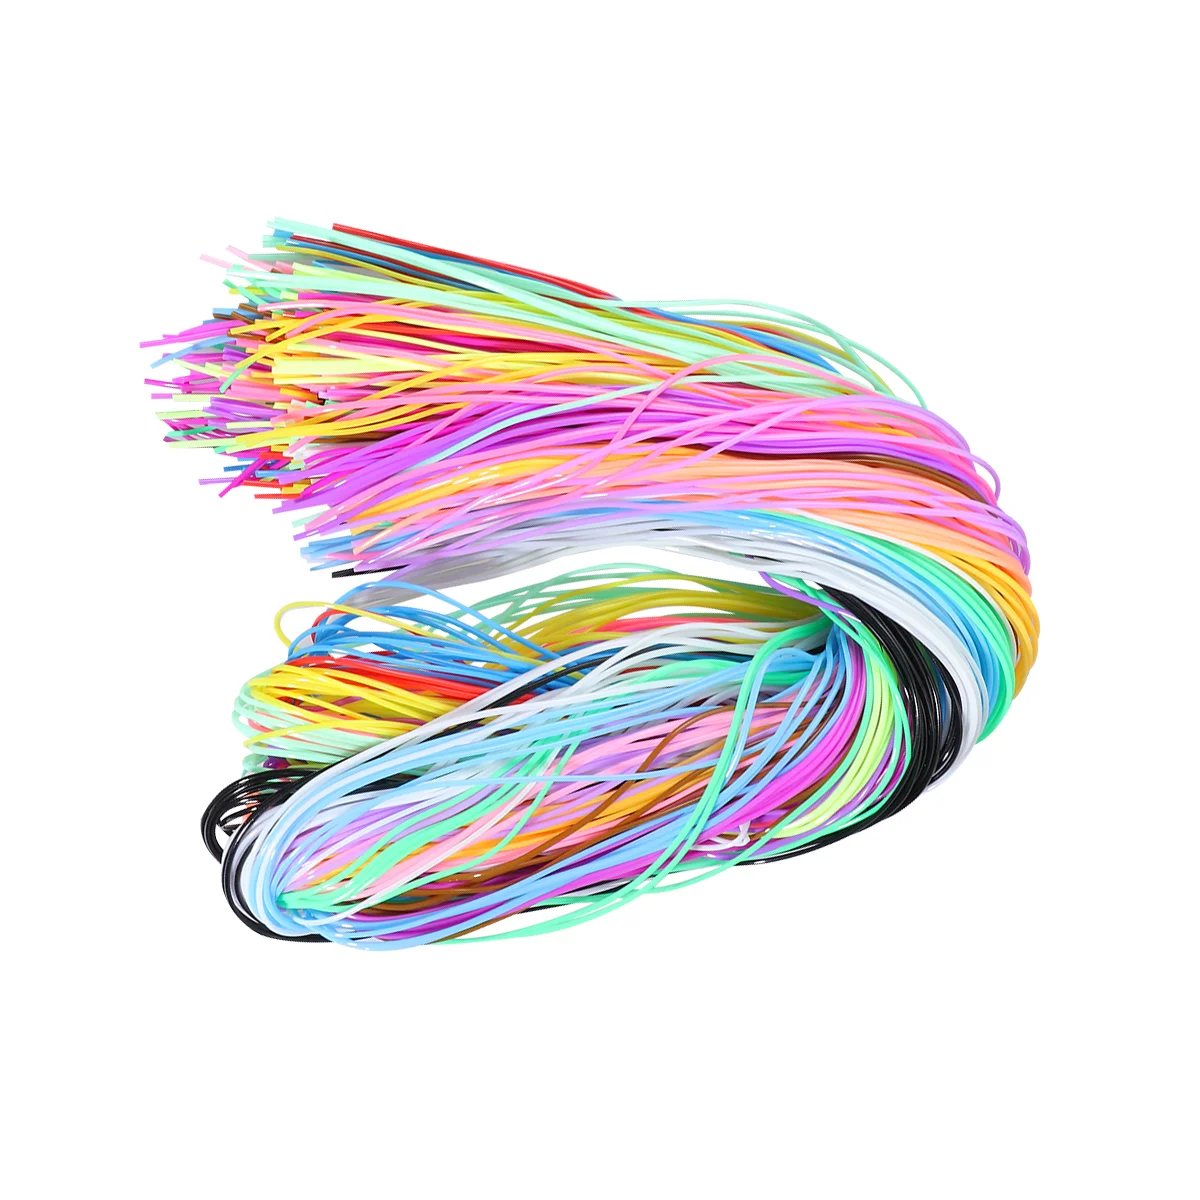 

200pcs Plastic Lanyard String 18MM Colorful Braided Cord Braided Cord Colorful Braided Rope DIY Braided Rope